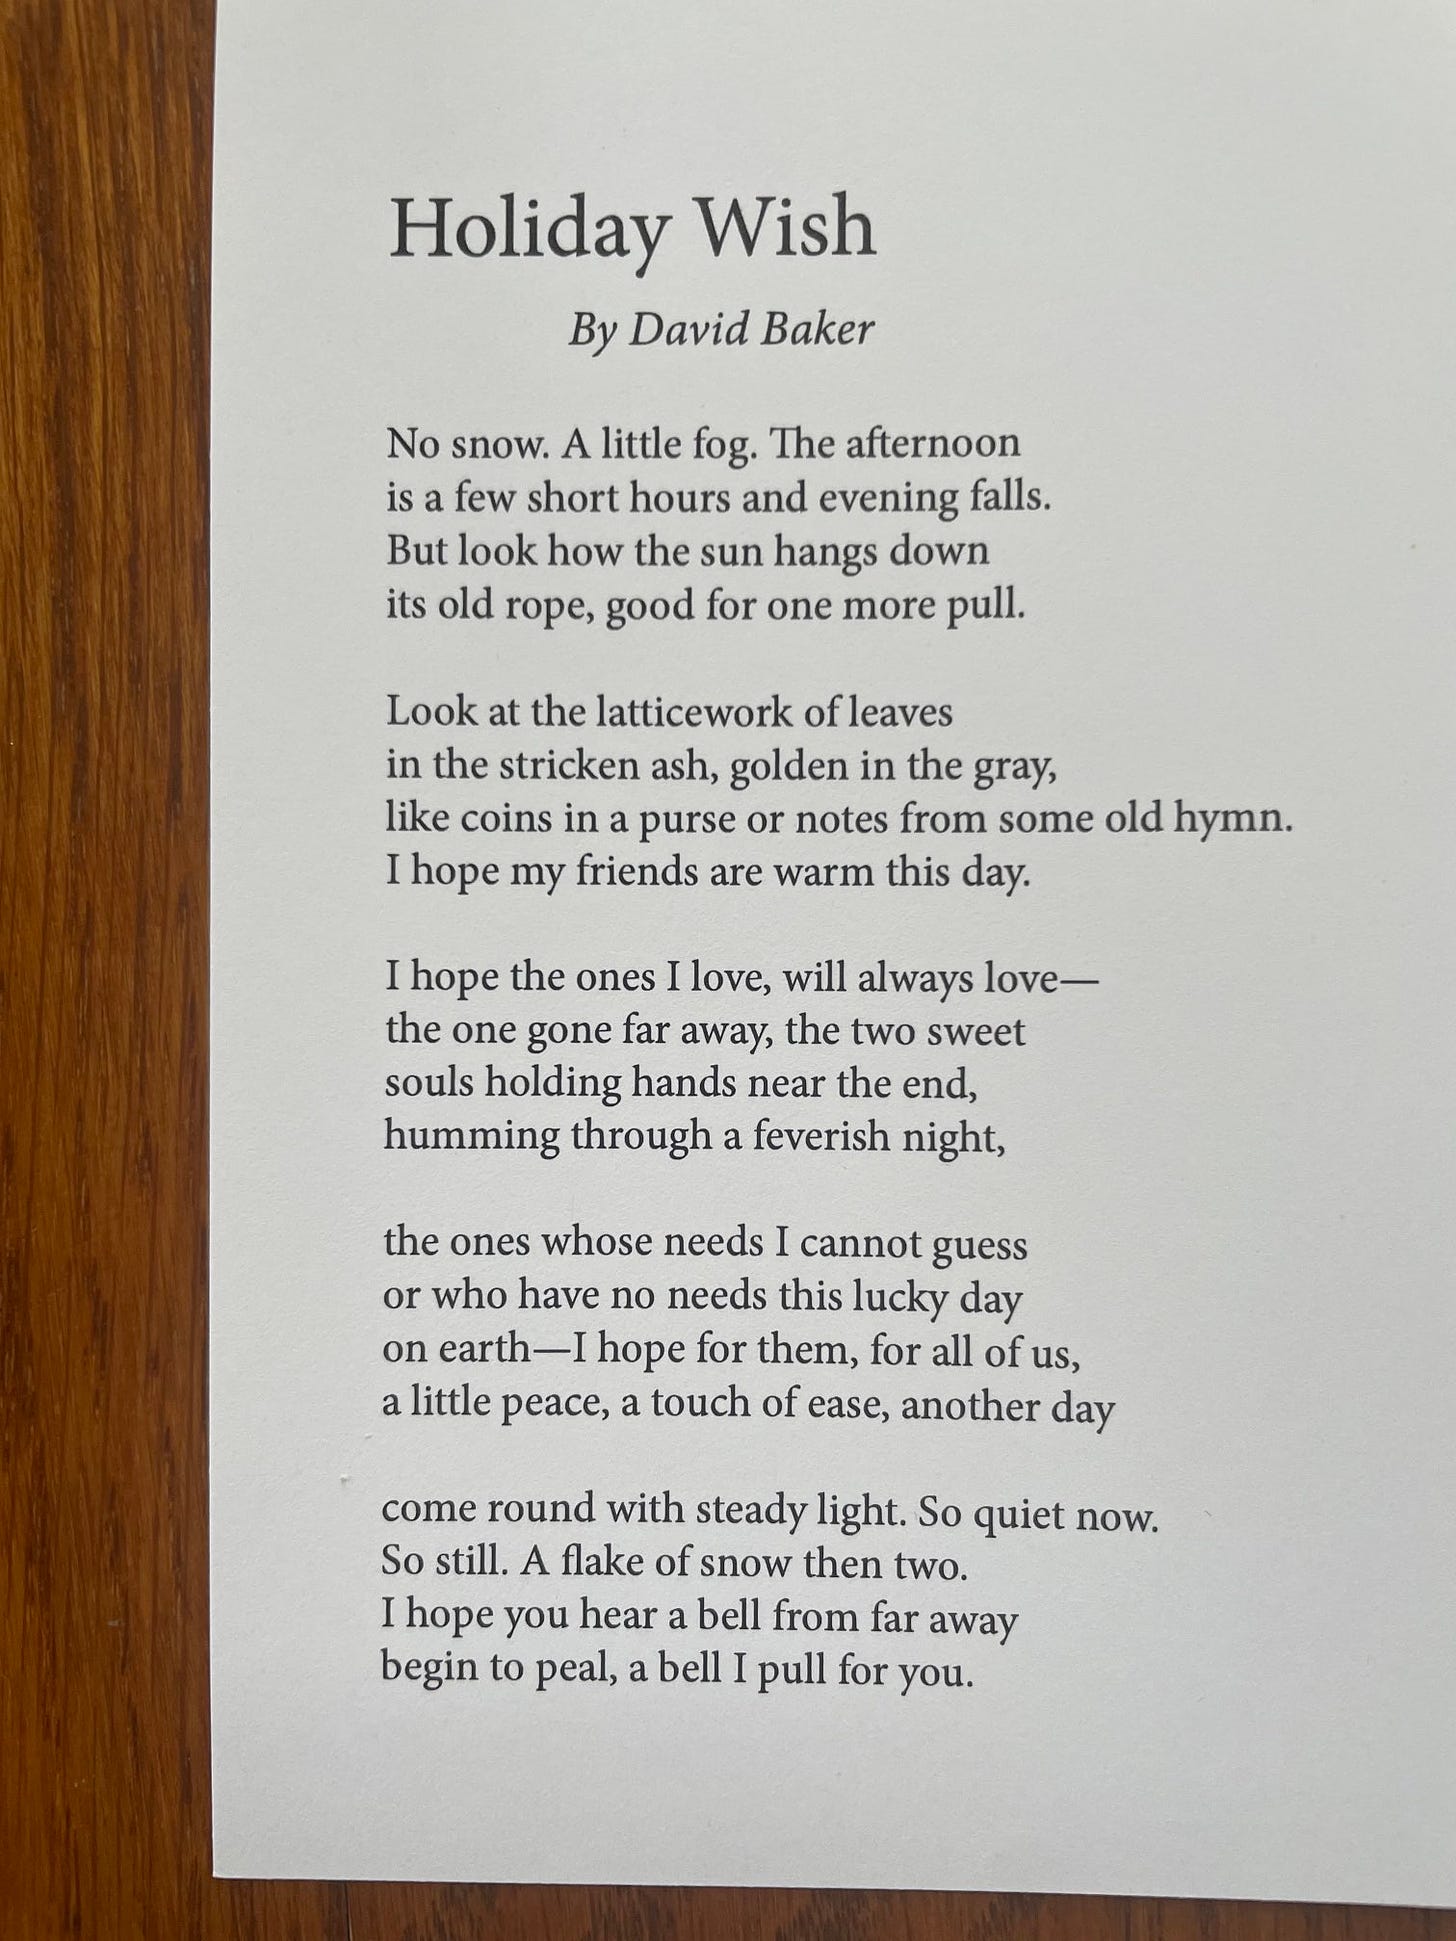 Holiday Wish by David Baker, No snow. A little fog. The afternoon / is a few short hours and evening falls. / But look how the sun hangs down / its old rope, good for one more pull.